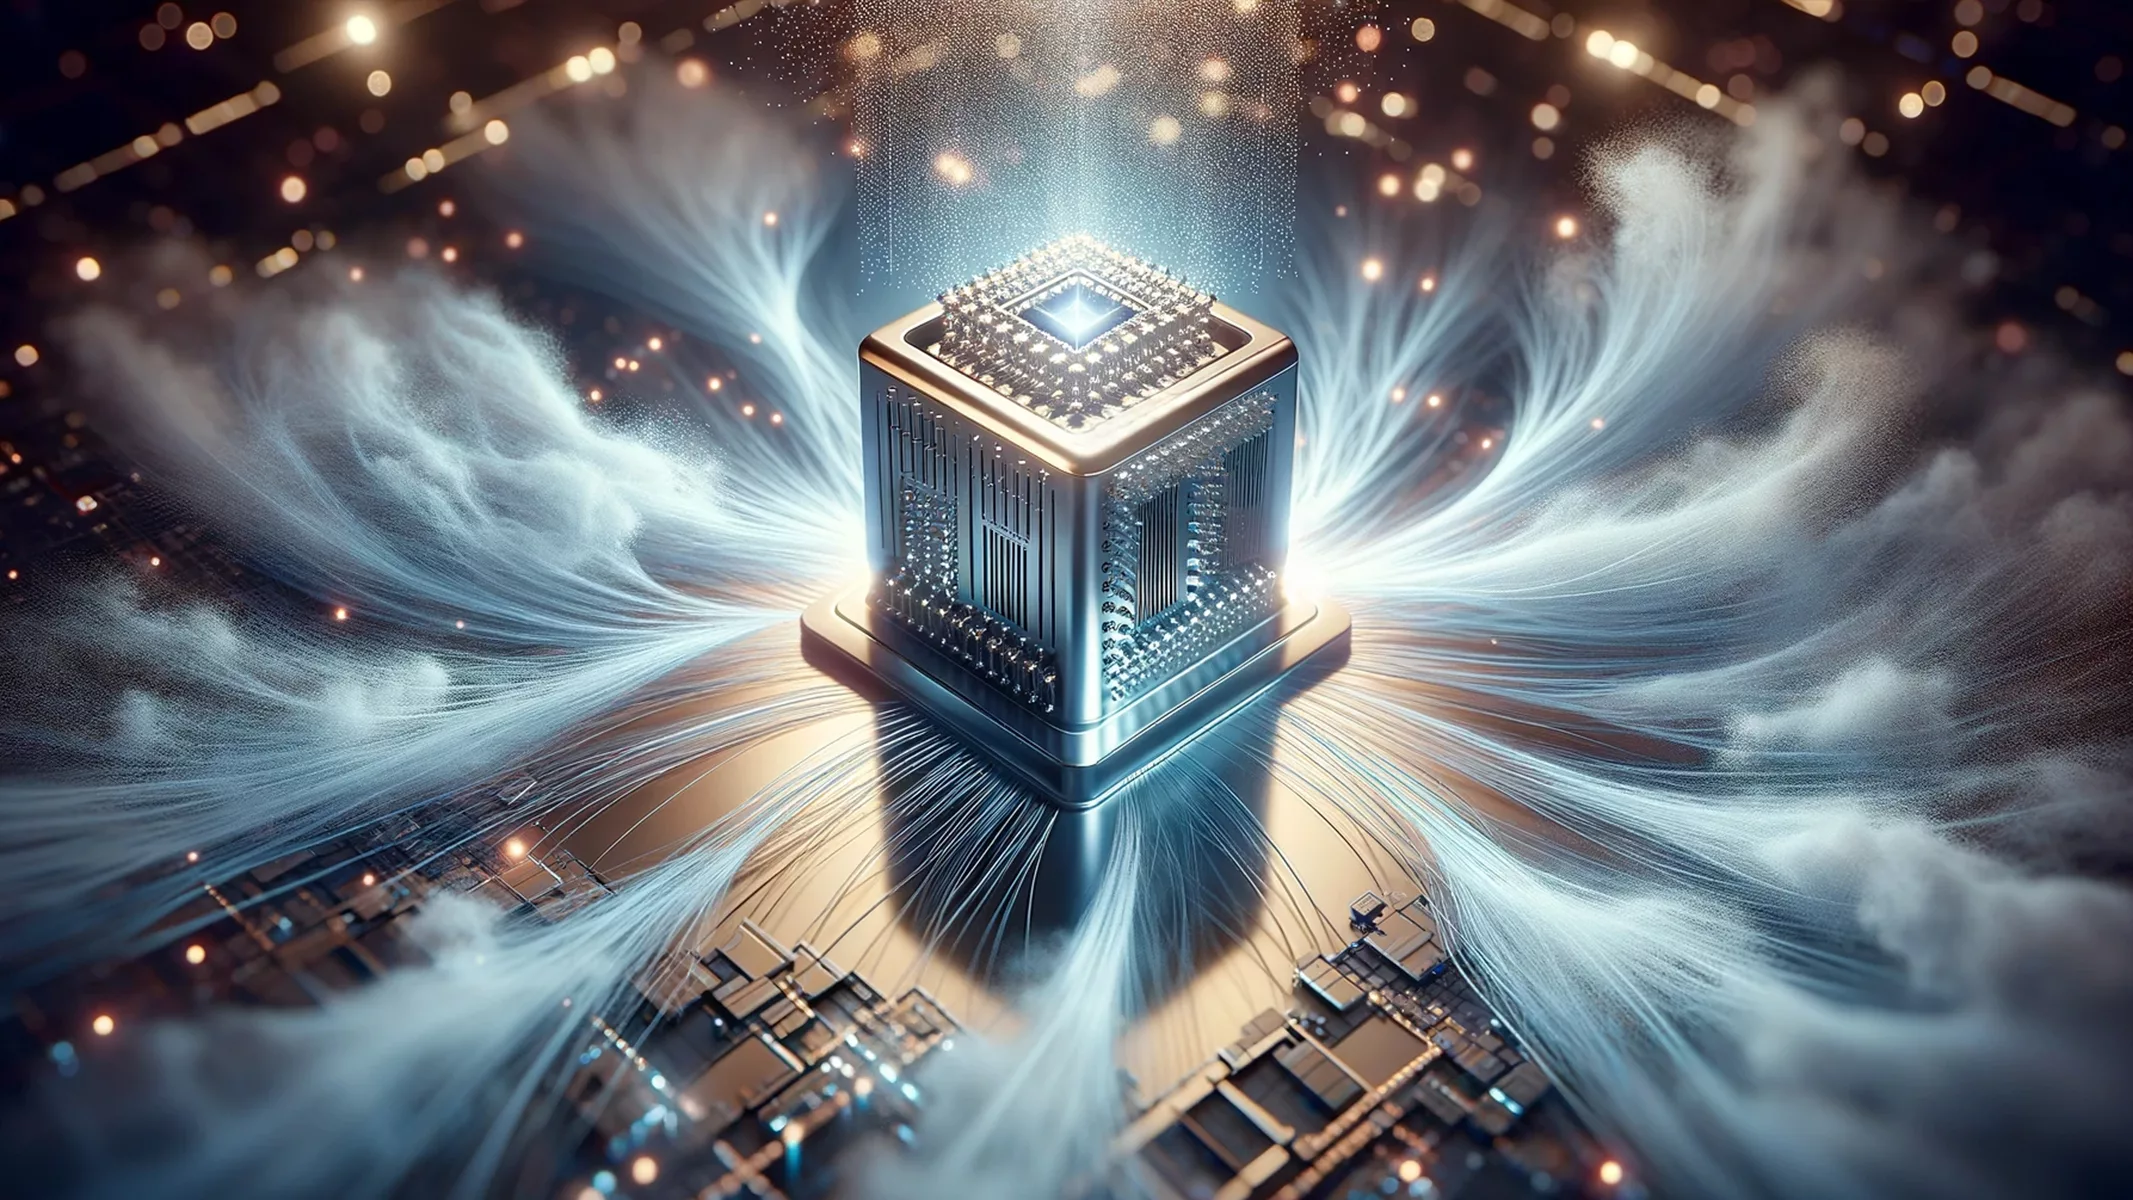 A quantum computer in the process of miniaturization, set against a background of wispy LK-99 superconductor material